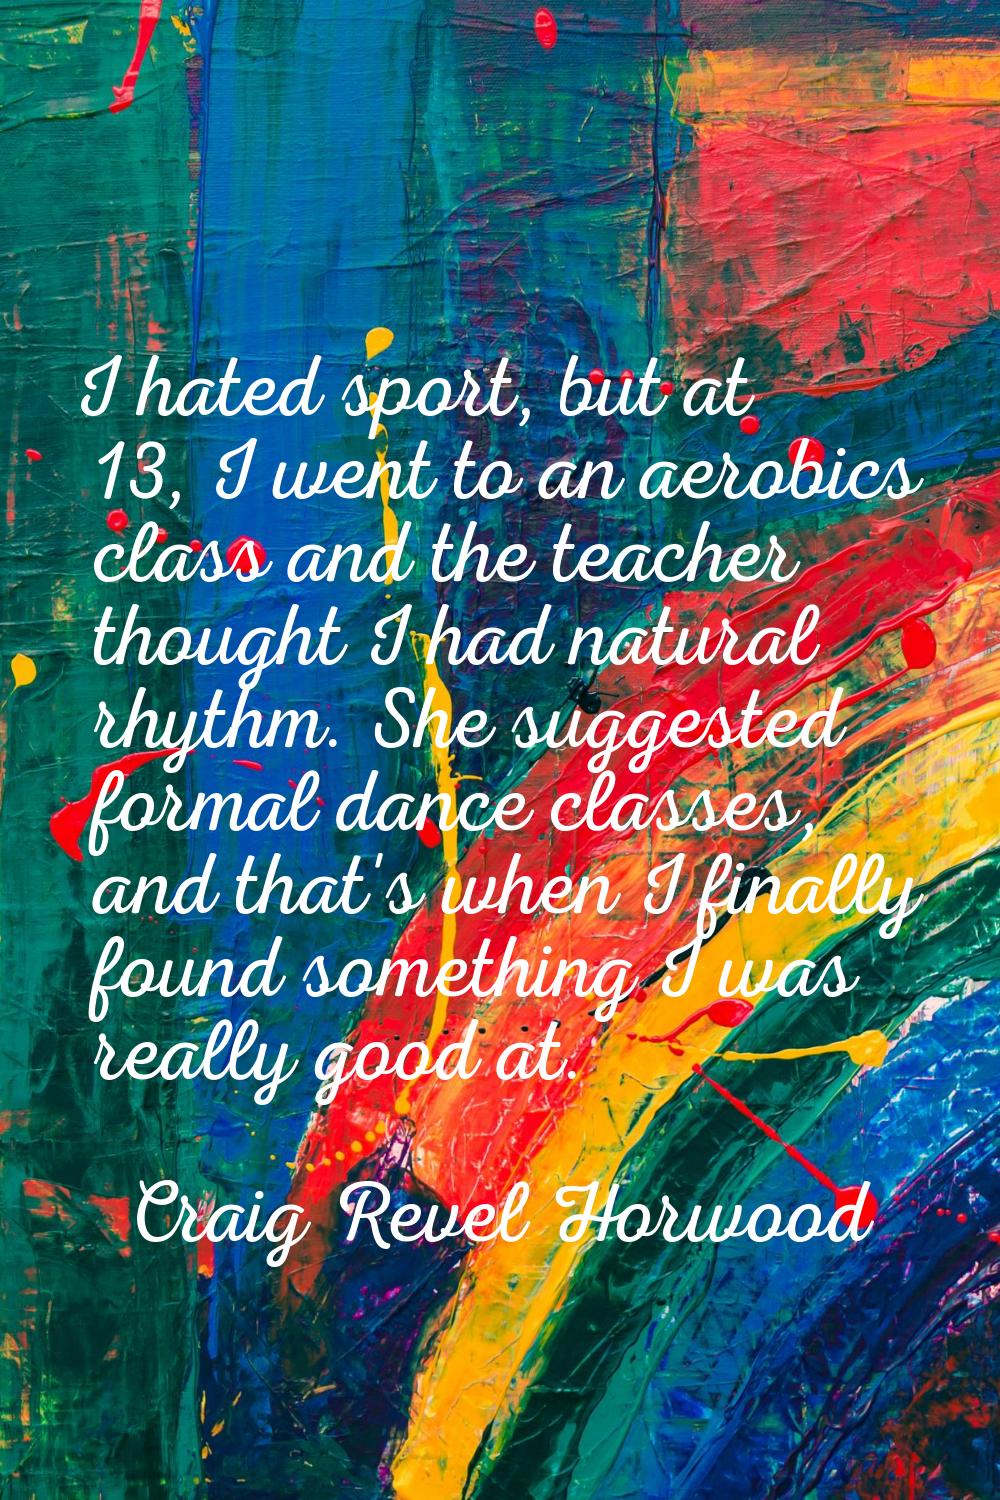 I hated sport, but at 13, I went to an aerobics class and the teacher thought I had natural rhythm.